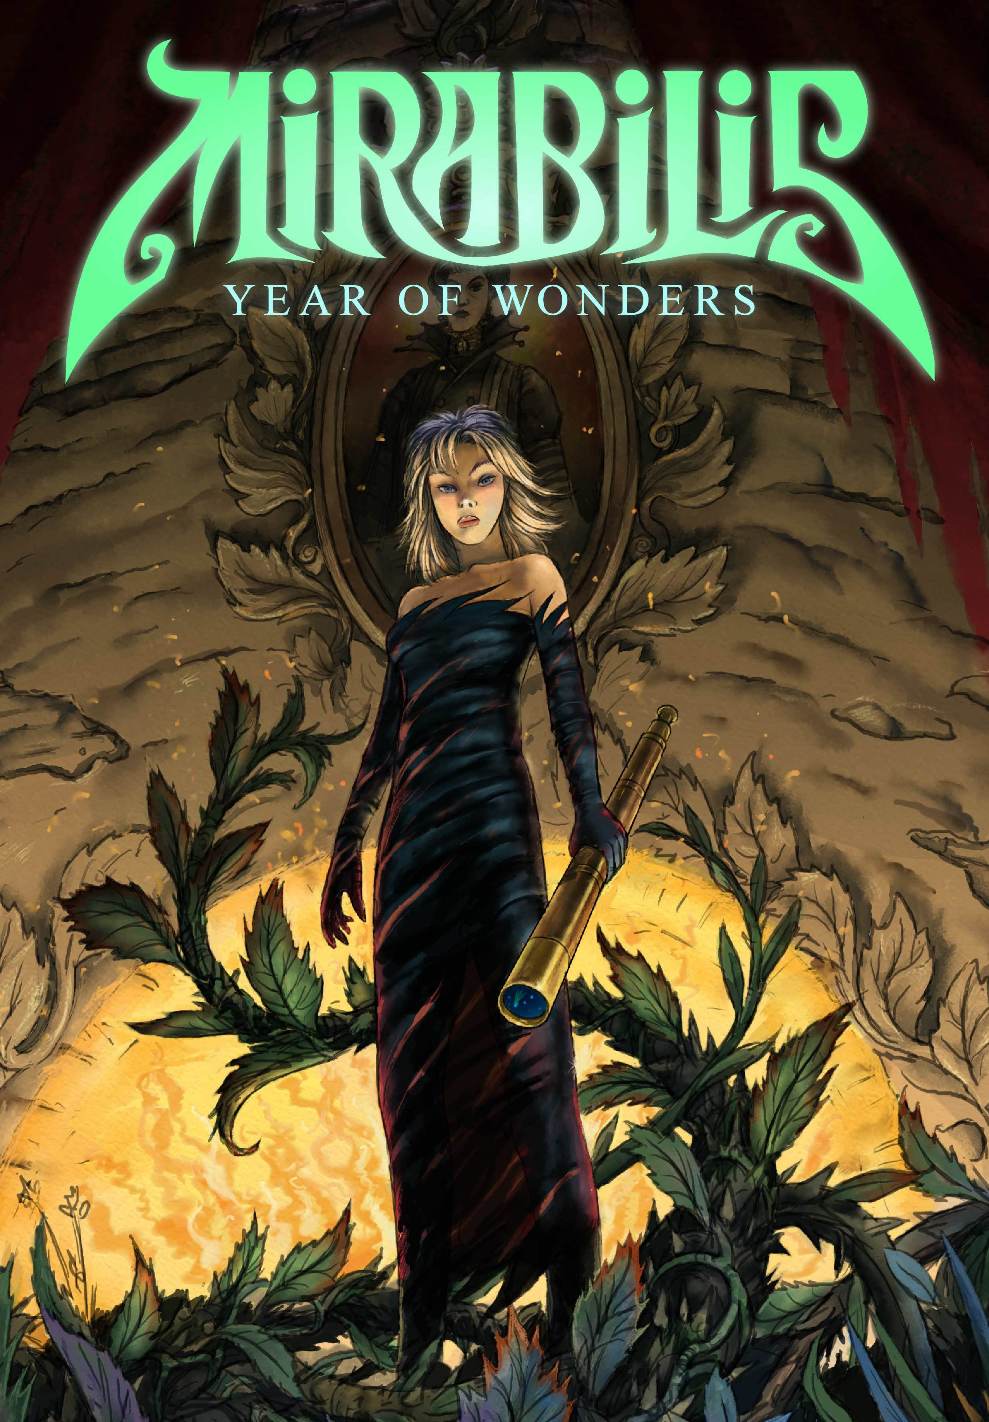 Mirabilis Year of Wonders: Book Two preview